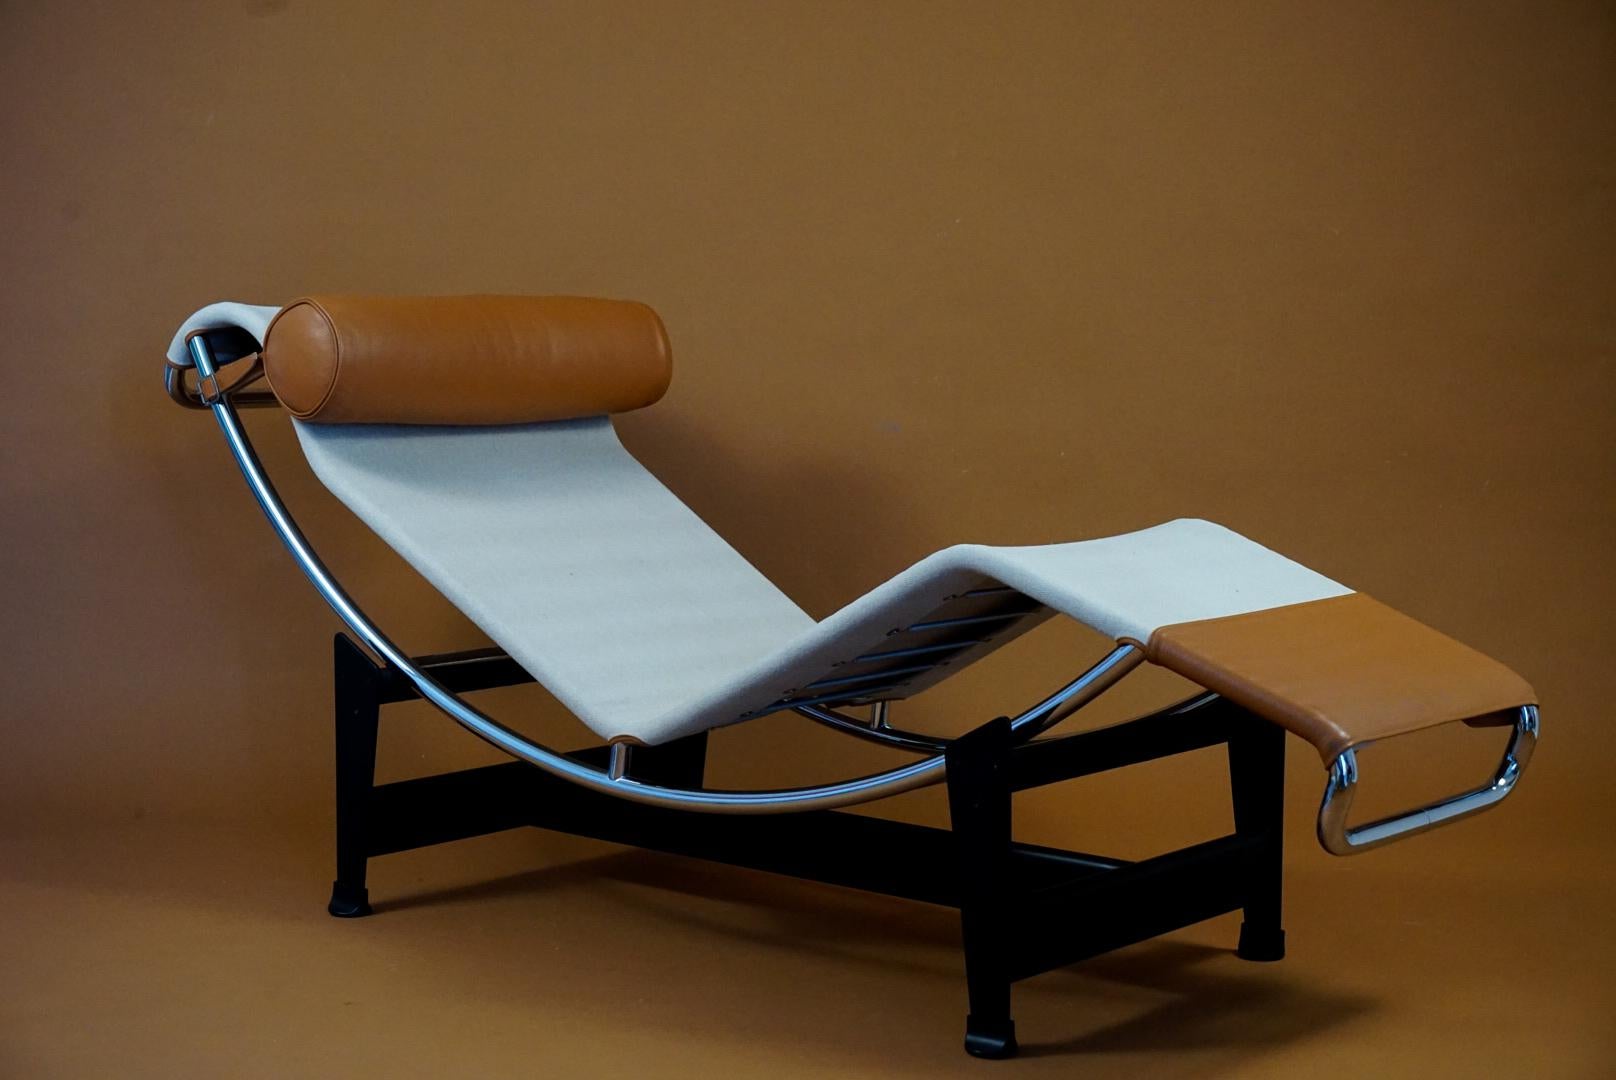 This LC4 is a rare color in Ecru Canvas and Tobacco leather, this model isn't sold or offered in the U.S. therefore making it a harder to find LC4 and highly desirable by collectors, architects and designers. 

Le Corbusier held that furniture